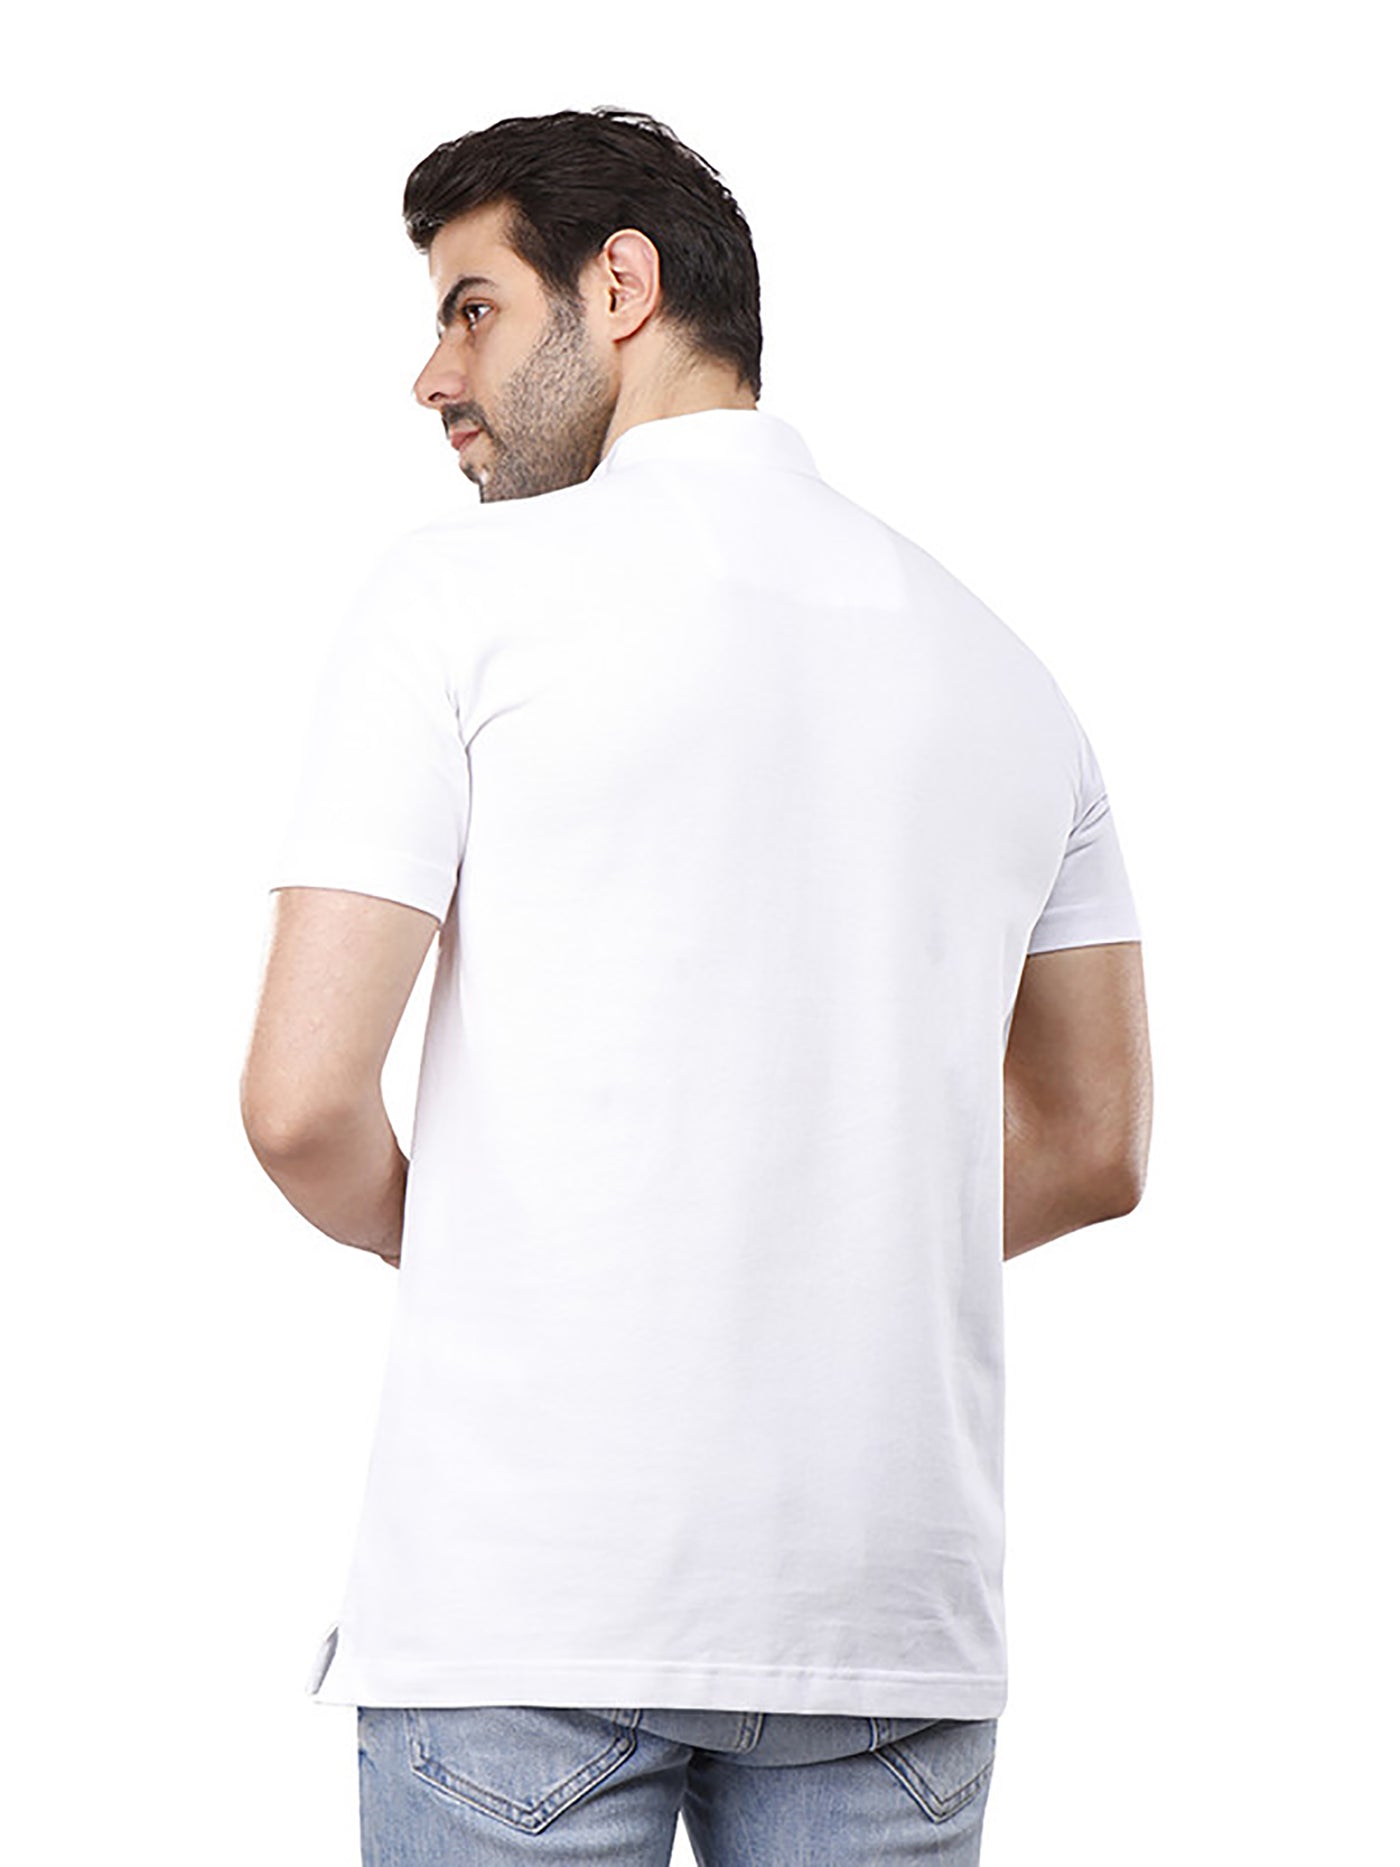 Polo Shirt - Solid - Buttoned Neck